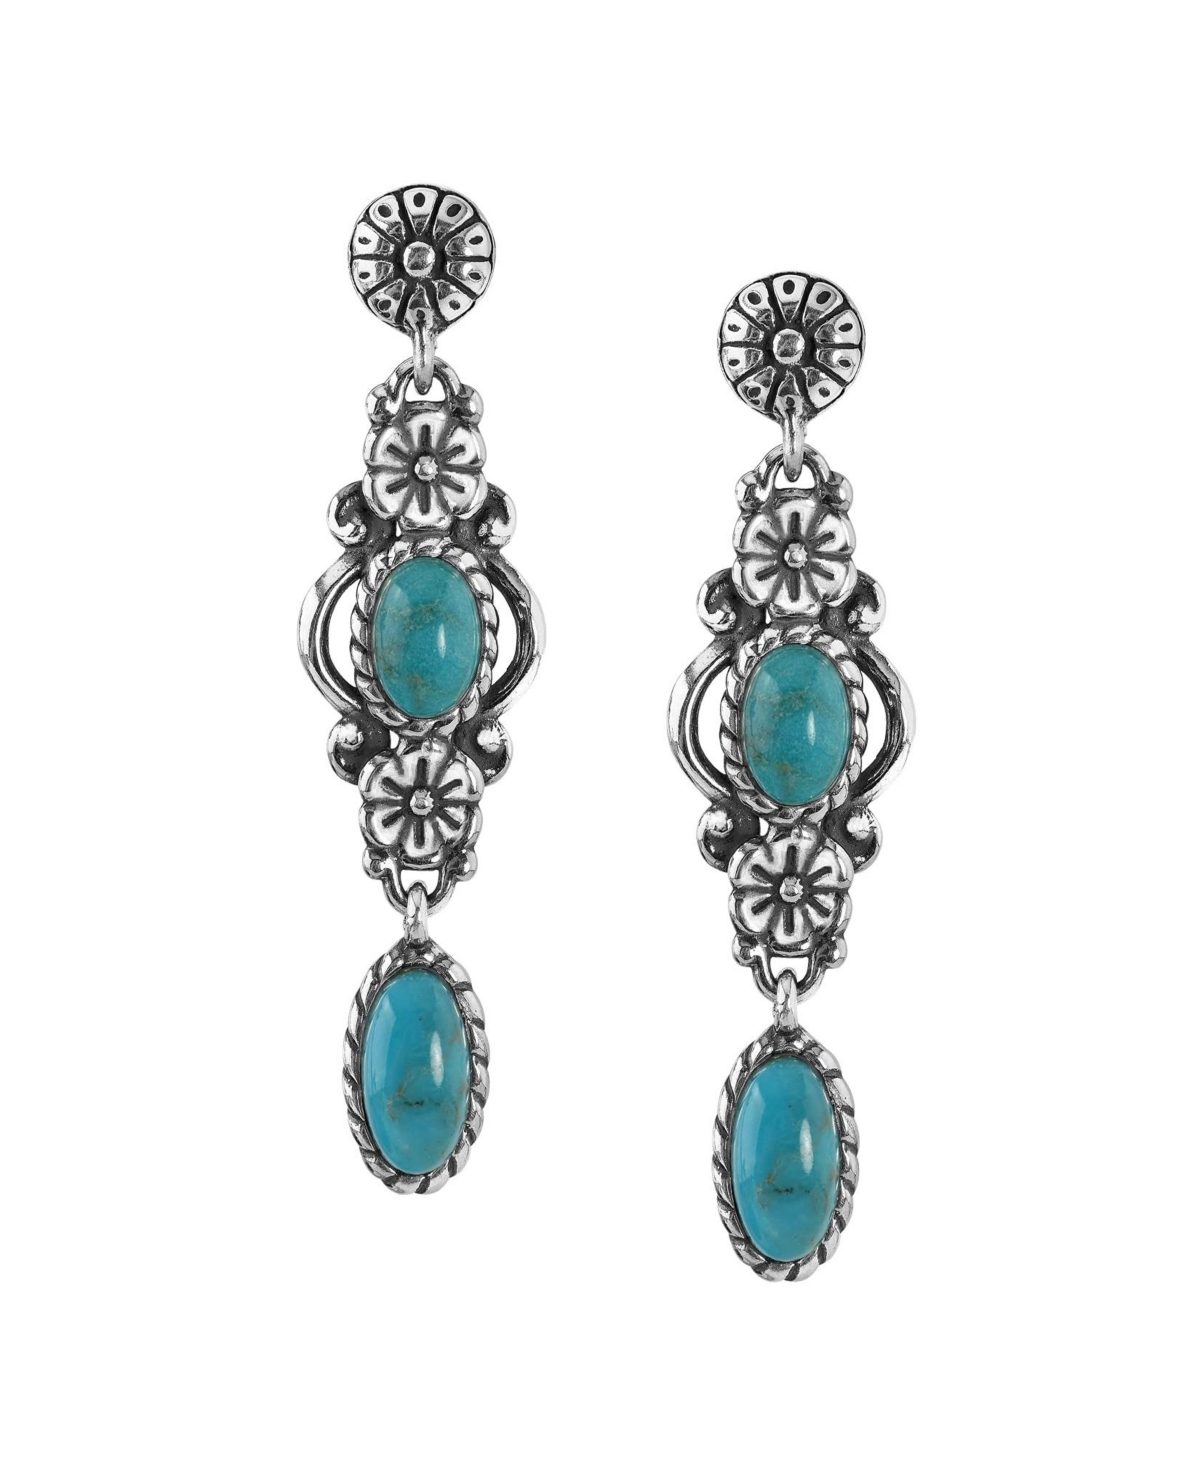 Sterling Silver Women s Drop and Dangle Earrings Genuine Gemstone Floral Design - Blue turquoise